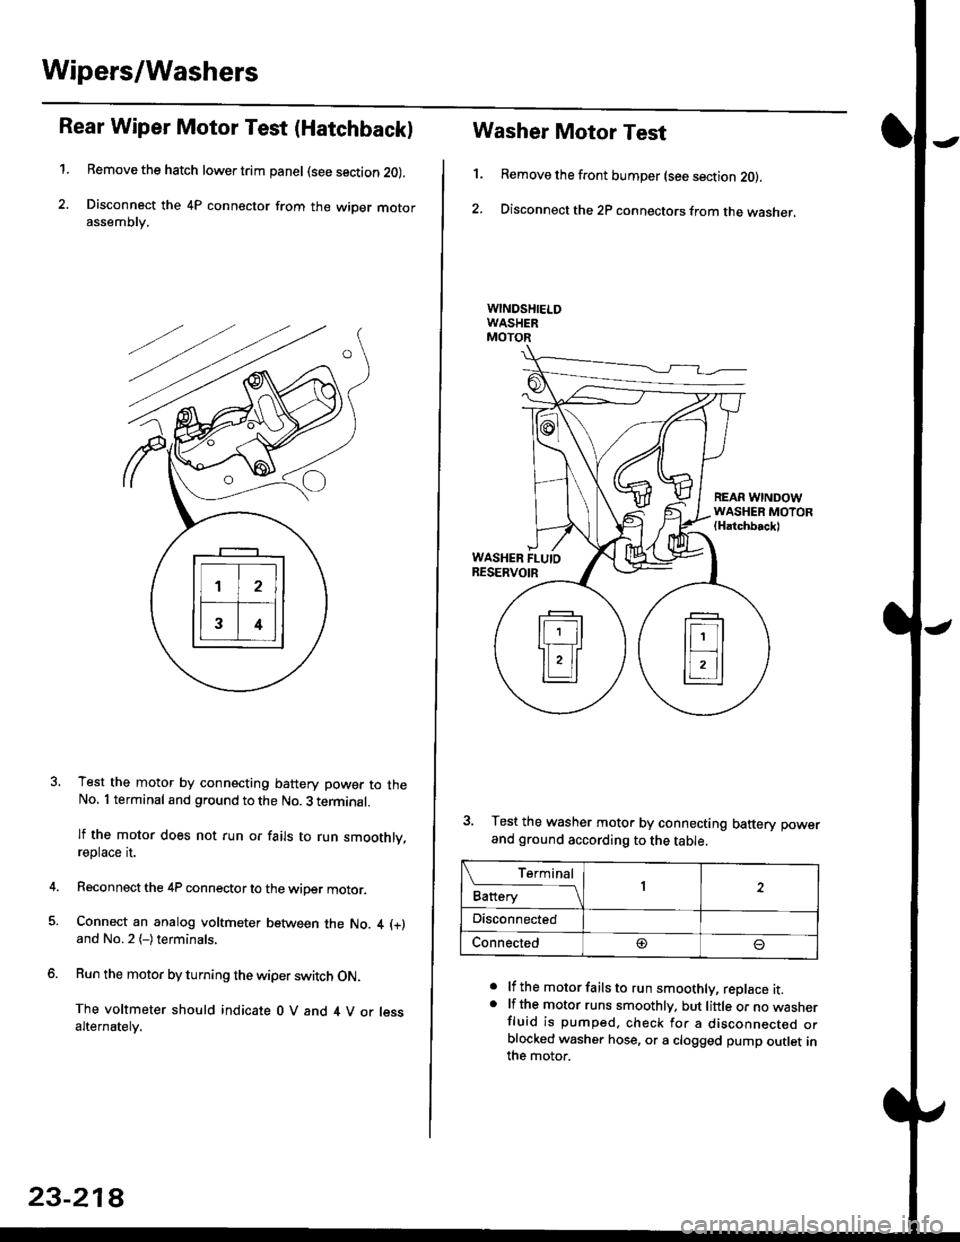 HONDA CIVIC 2000 6.G Owners Manual Wipers/Washers
Rear Wiper Motor Test (Hatchback)
1.Remove the hatch lower trim panel (see section 20).
Disconnect the 4P connector from the wiper motorassemDry,
Test the motor by connecting battery po